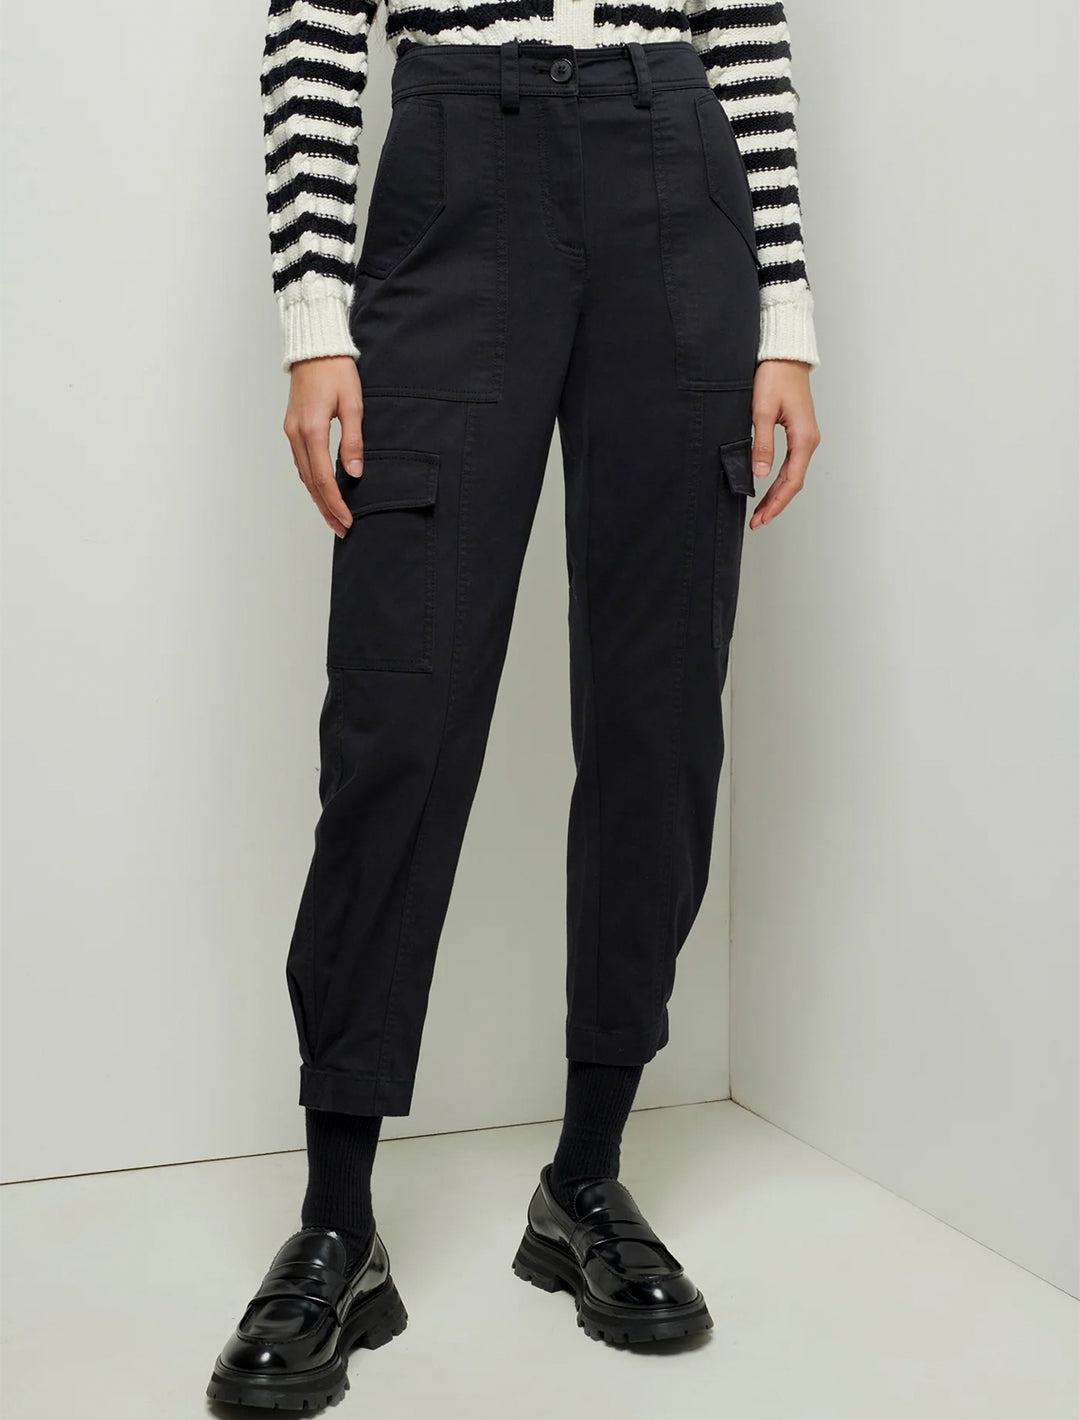 model wearing elian pant in black with a striped top and loafers 